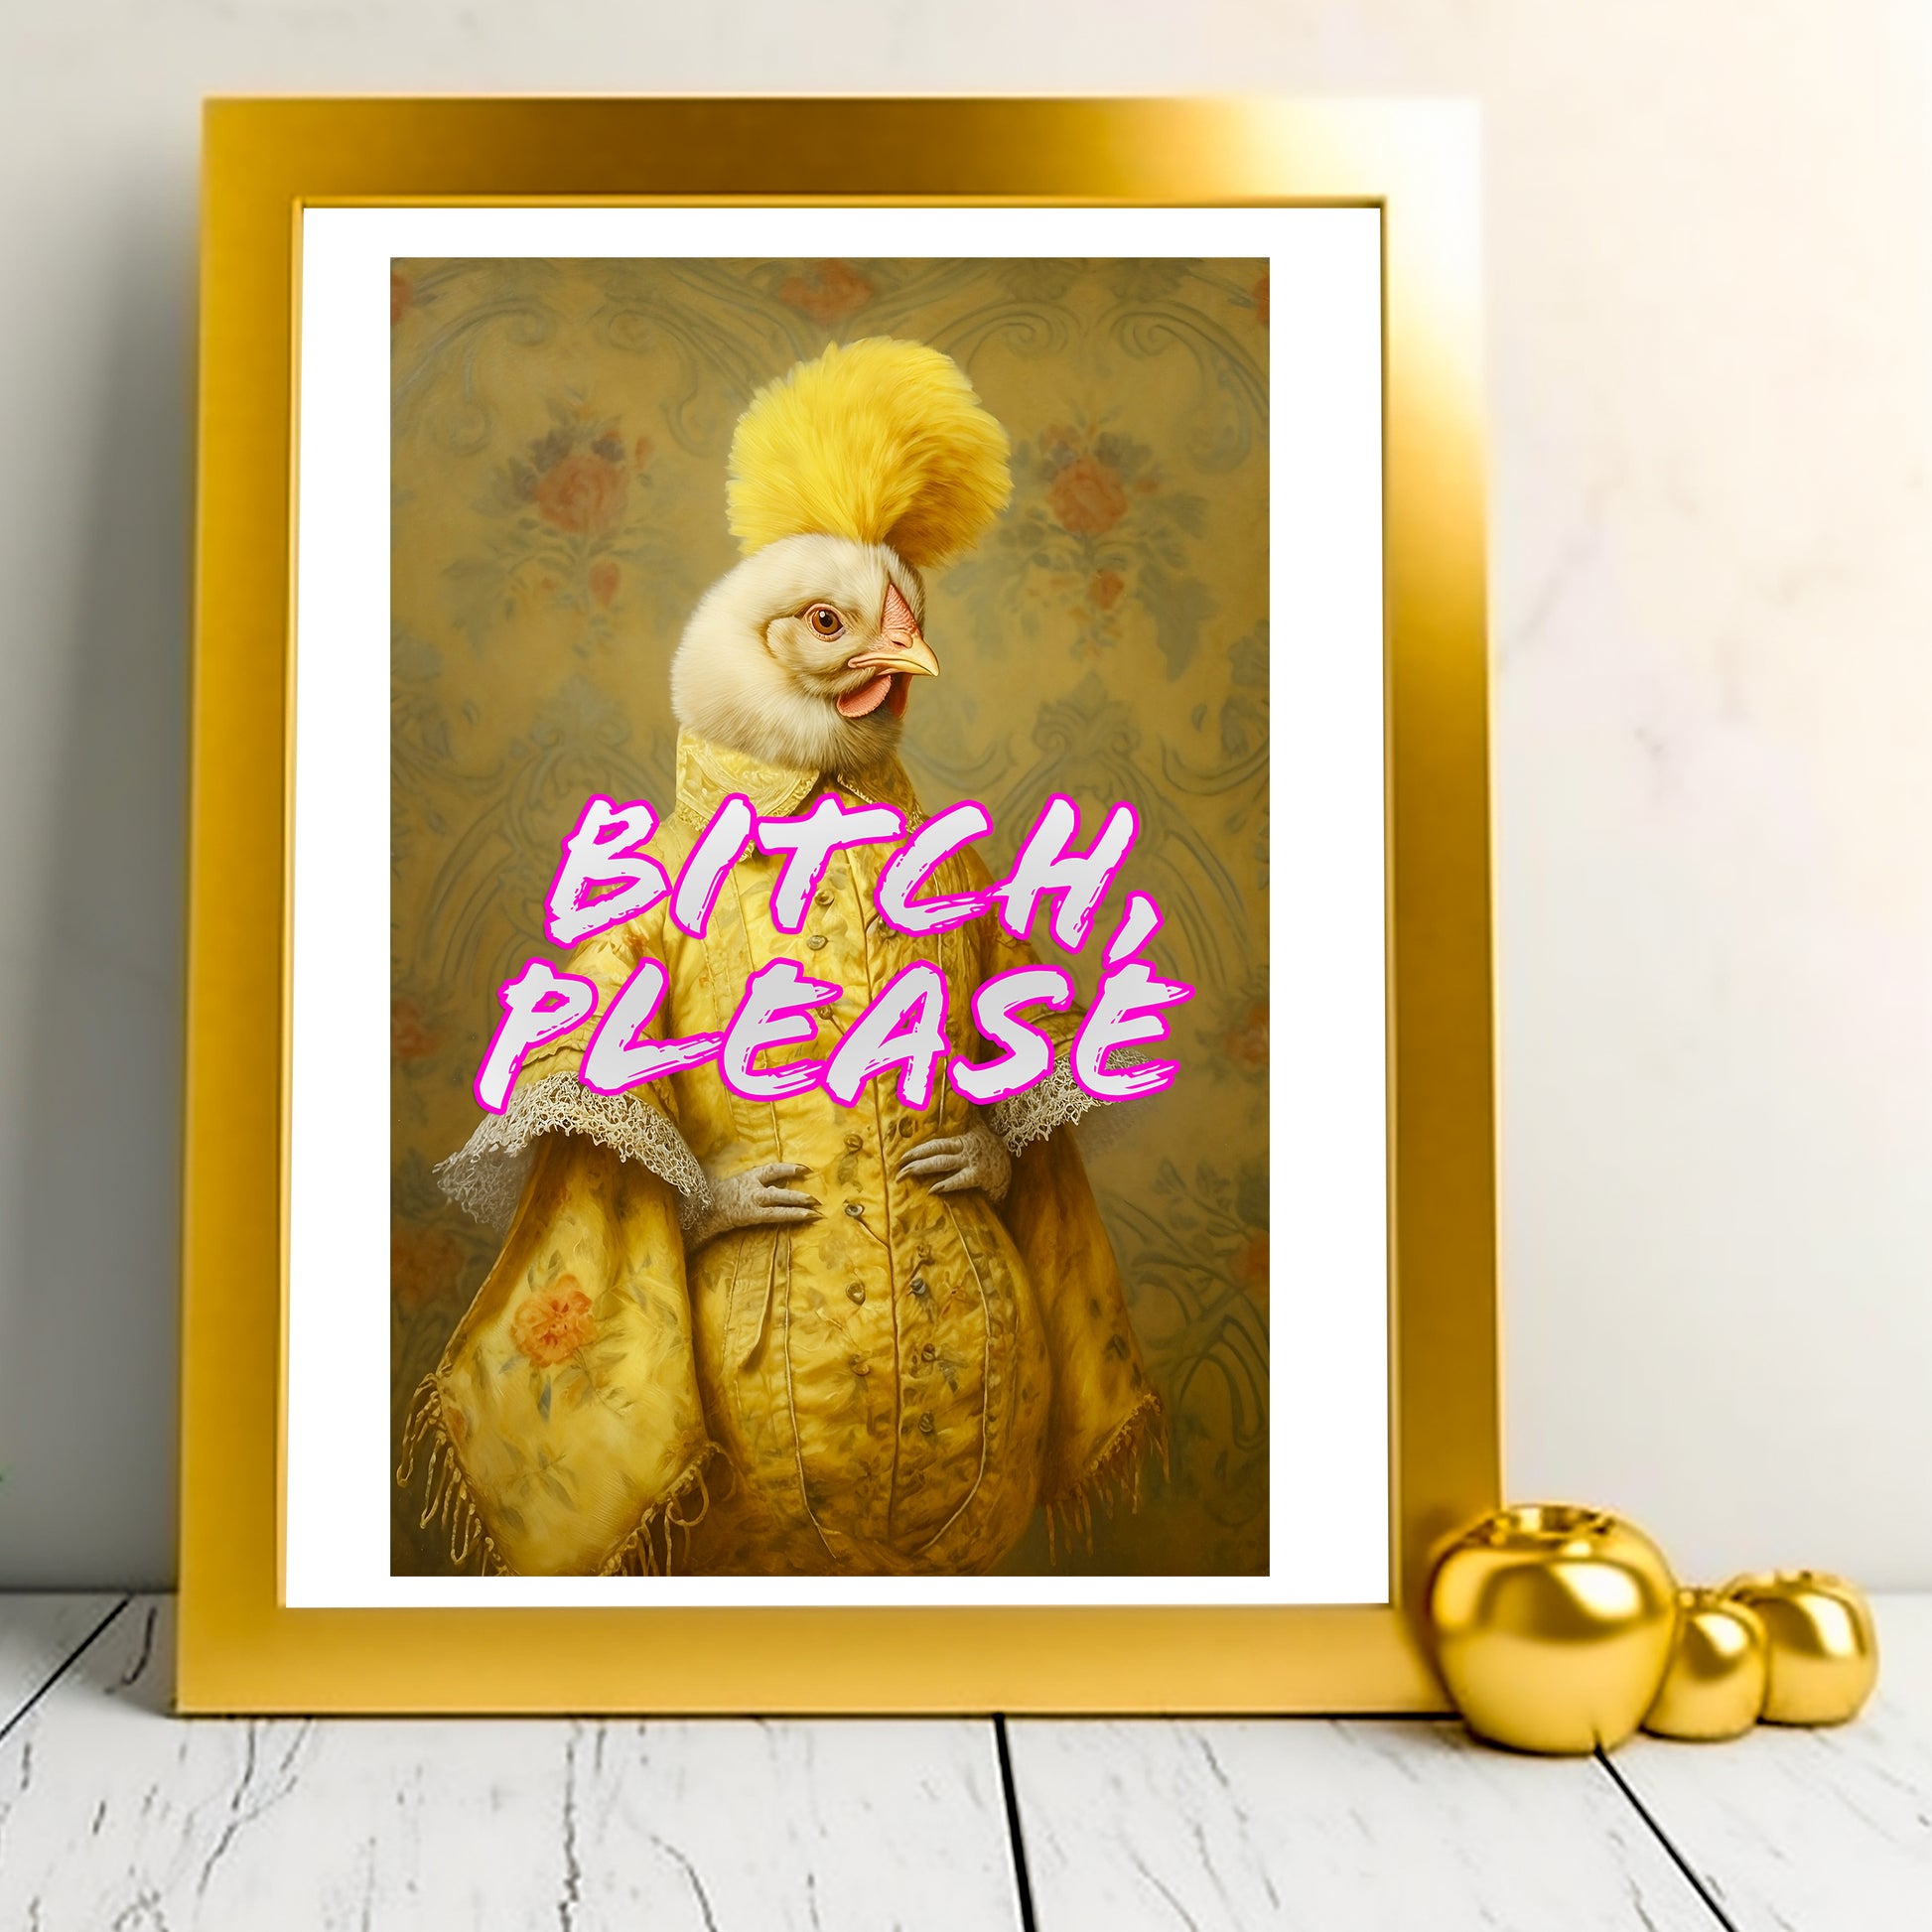 Sassy Victorian Hen Portrait | Altered Portrait 'B*tch Please' | Unique Home Decor from The Curated Goose